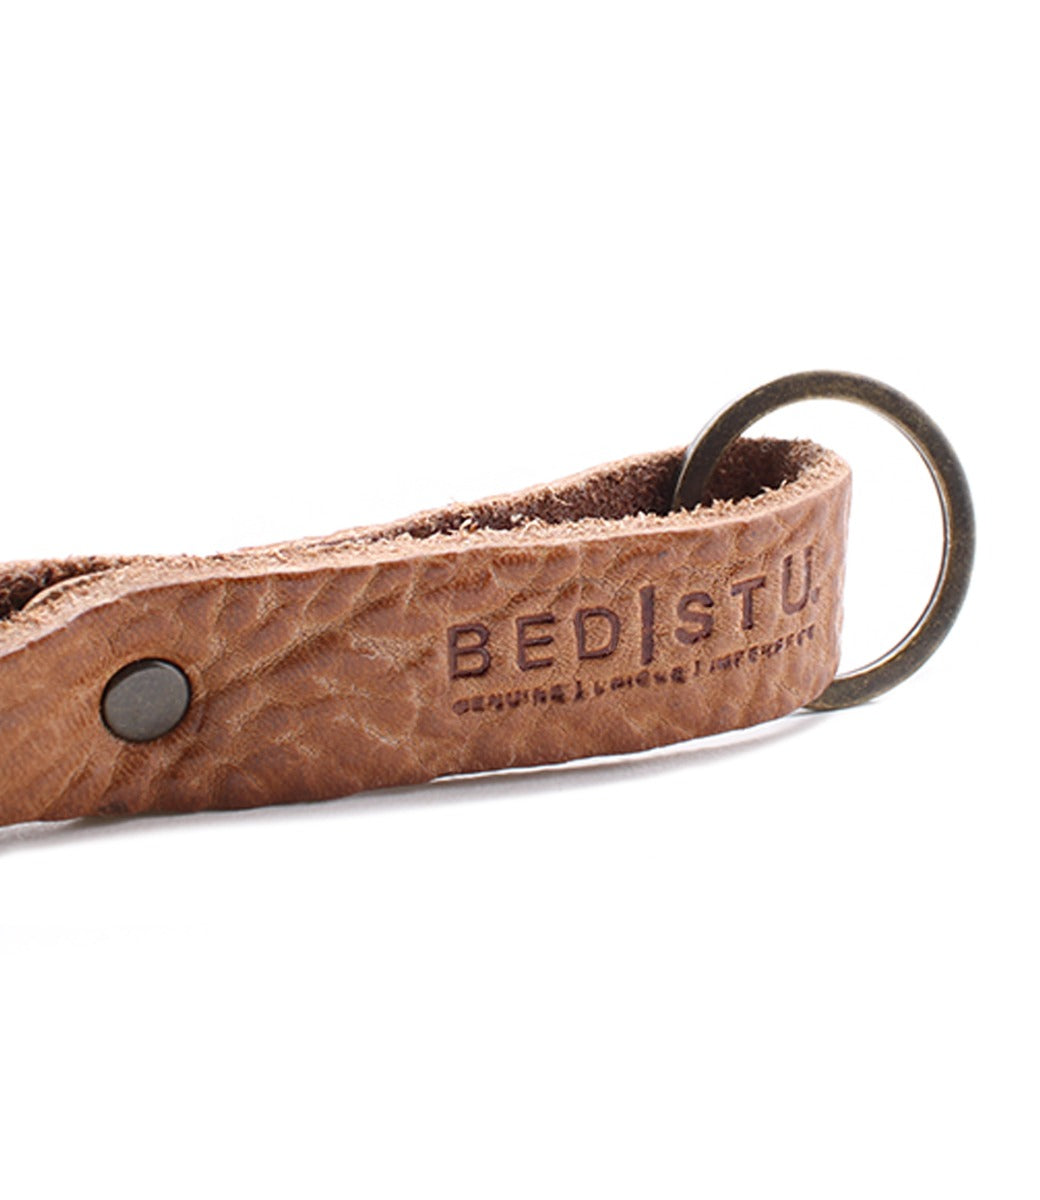 A leather Keygrab with the word Bed Stu on it.